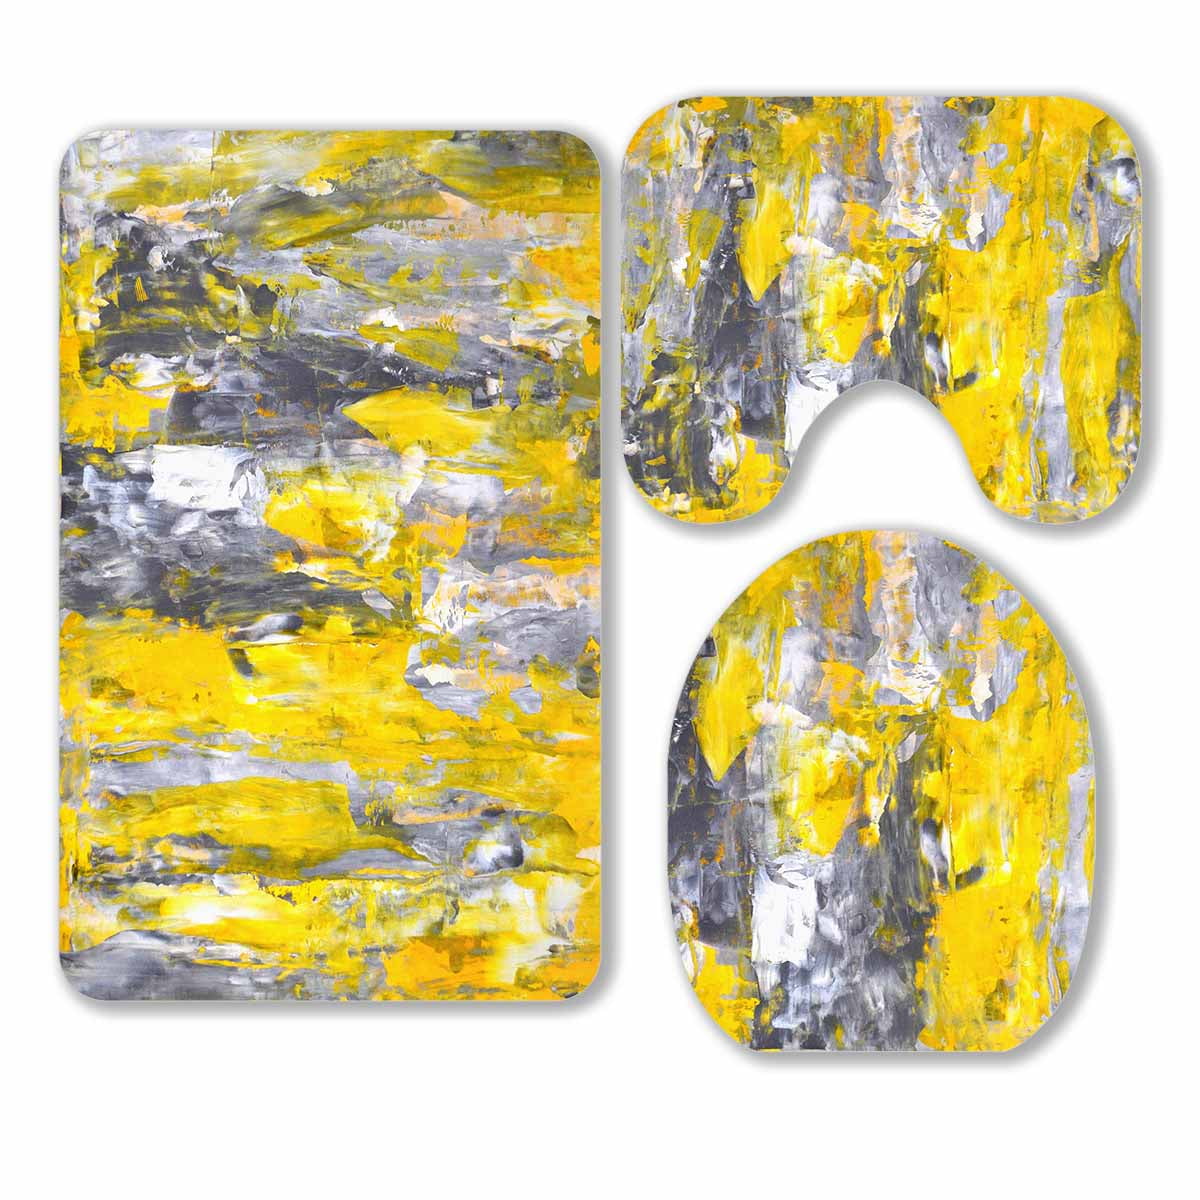 PKQWTM Grey And Yellow Abstract Art Painting 3 Piece